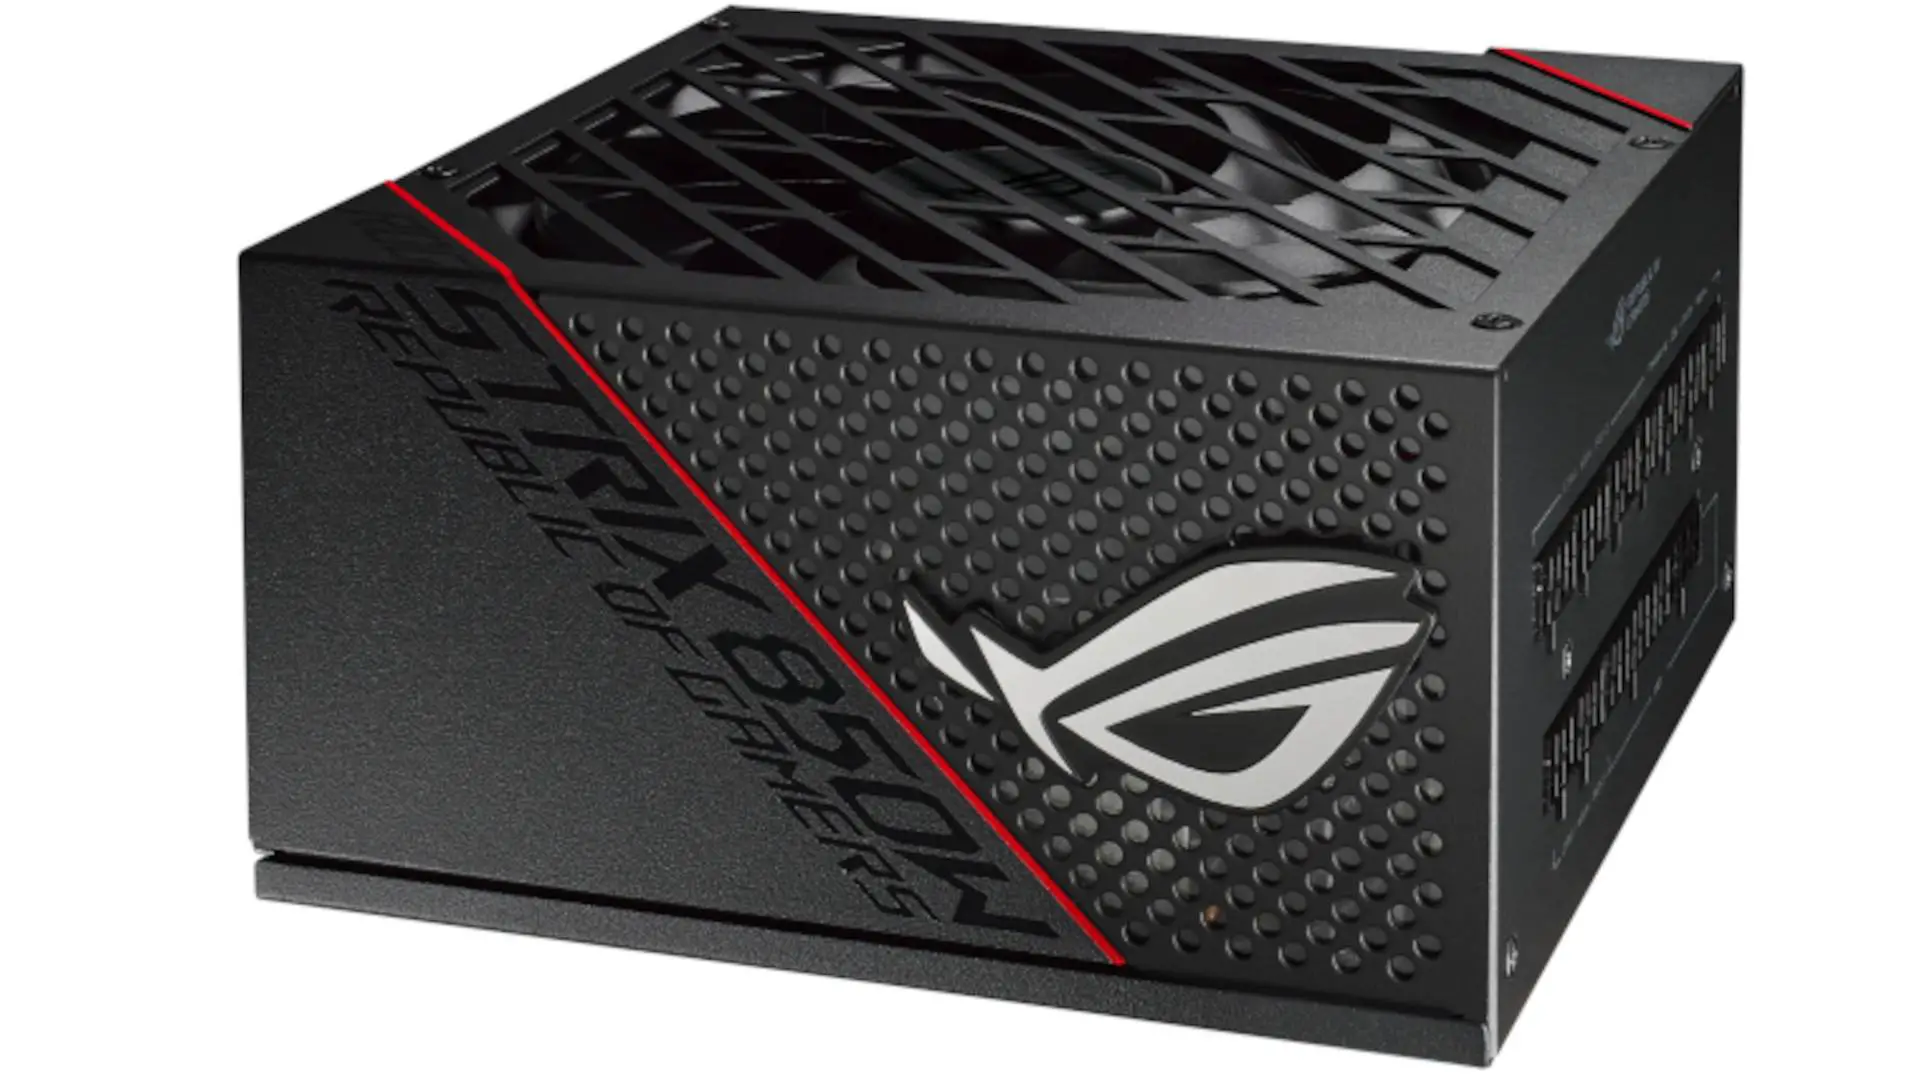 Read more about the article ROG STRIX 850W Gold (16-pin cable) Power Supply Review